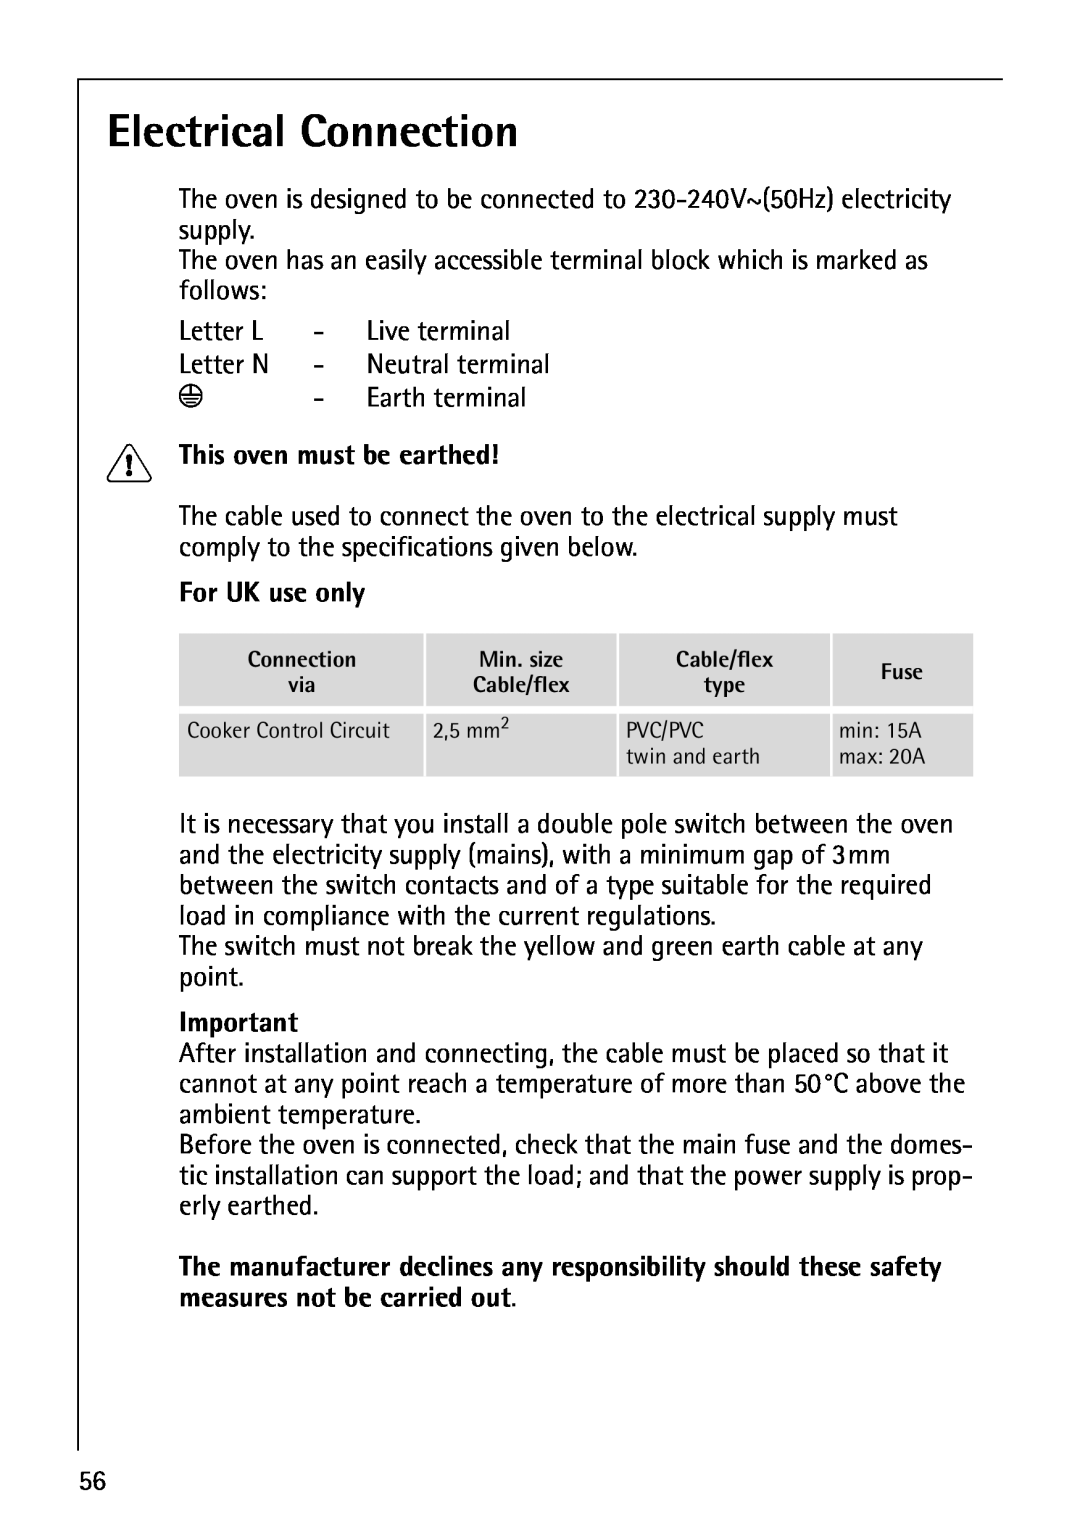 Electrolux B8871-4 manual Electrical Connection, This oven must be earthed, For UK use only 